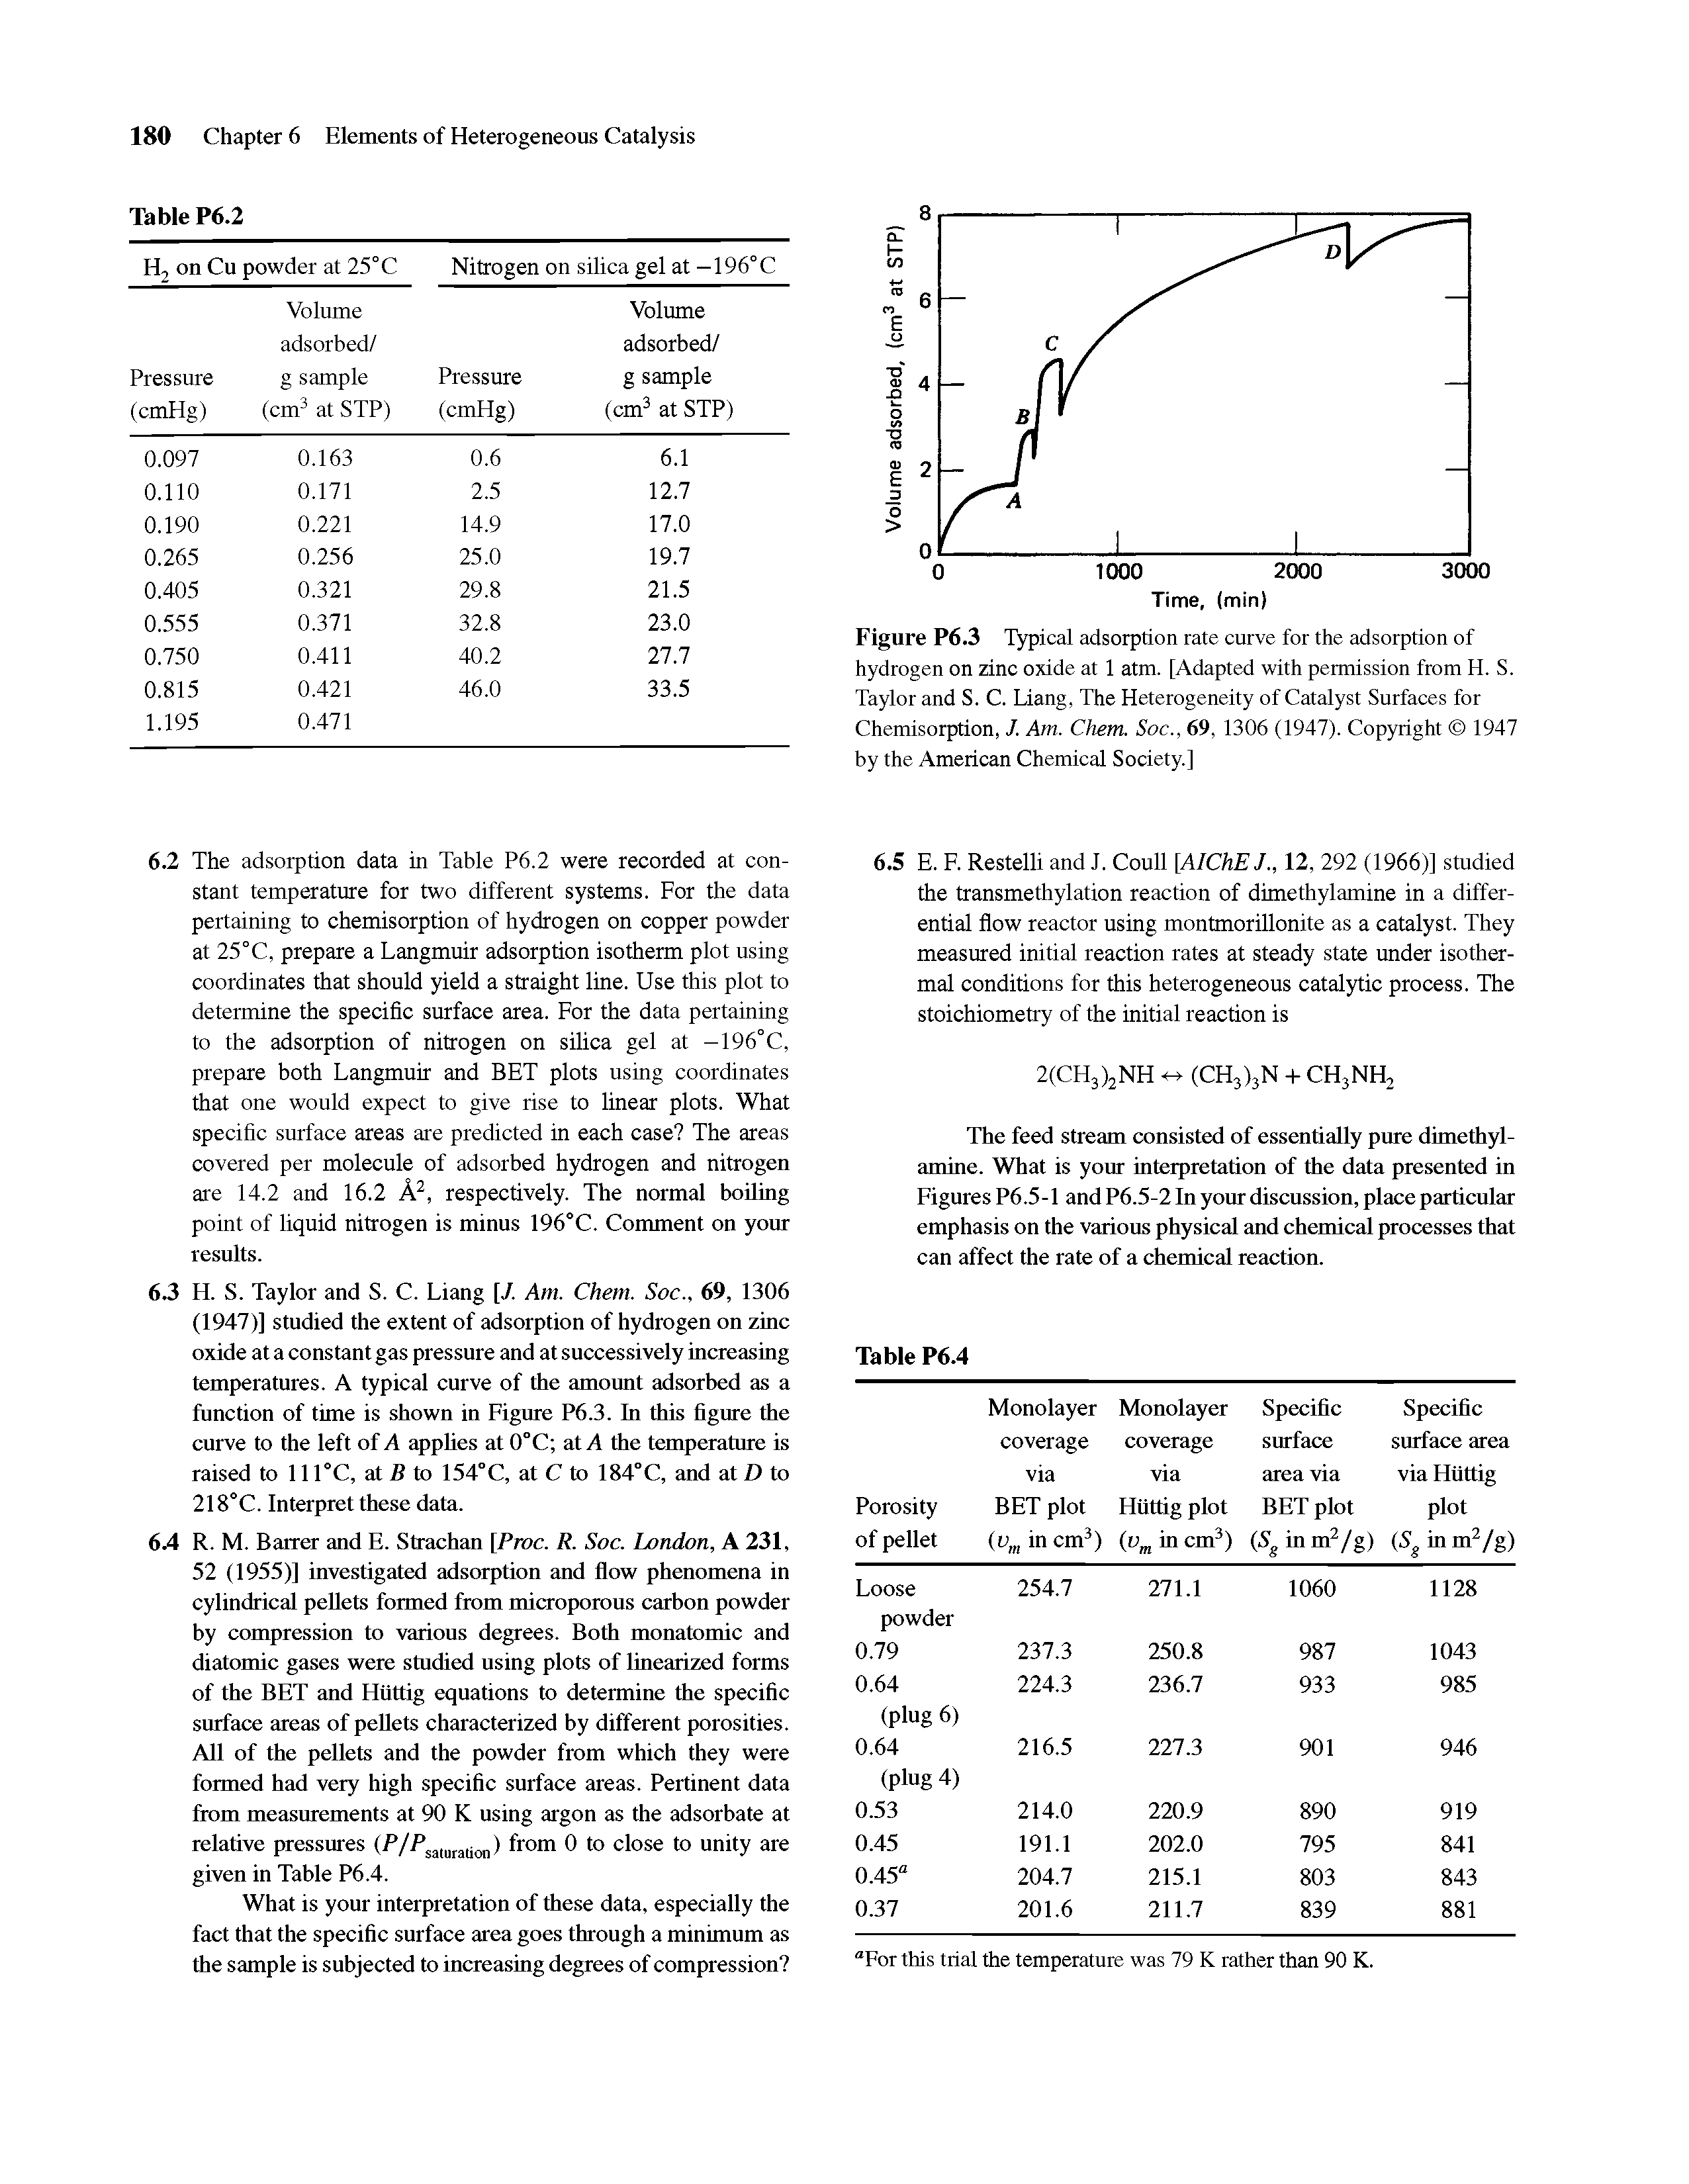 Figure P6.3 Typical adsorption rate curve for the adsorption of hydrogen on zinc oxide at 1 atm. [Adapted with permission from H. S. Taylor and S. C. Liang, The Heterogeneity of Catalyst Surfaces for Chemisorption, J. Am. Chem. Soc., 69, 1306 (1947). Copyright 1947 by the American Chemical Society.]...